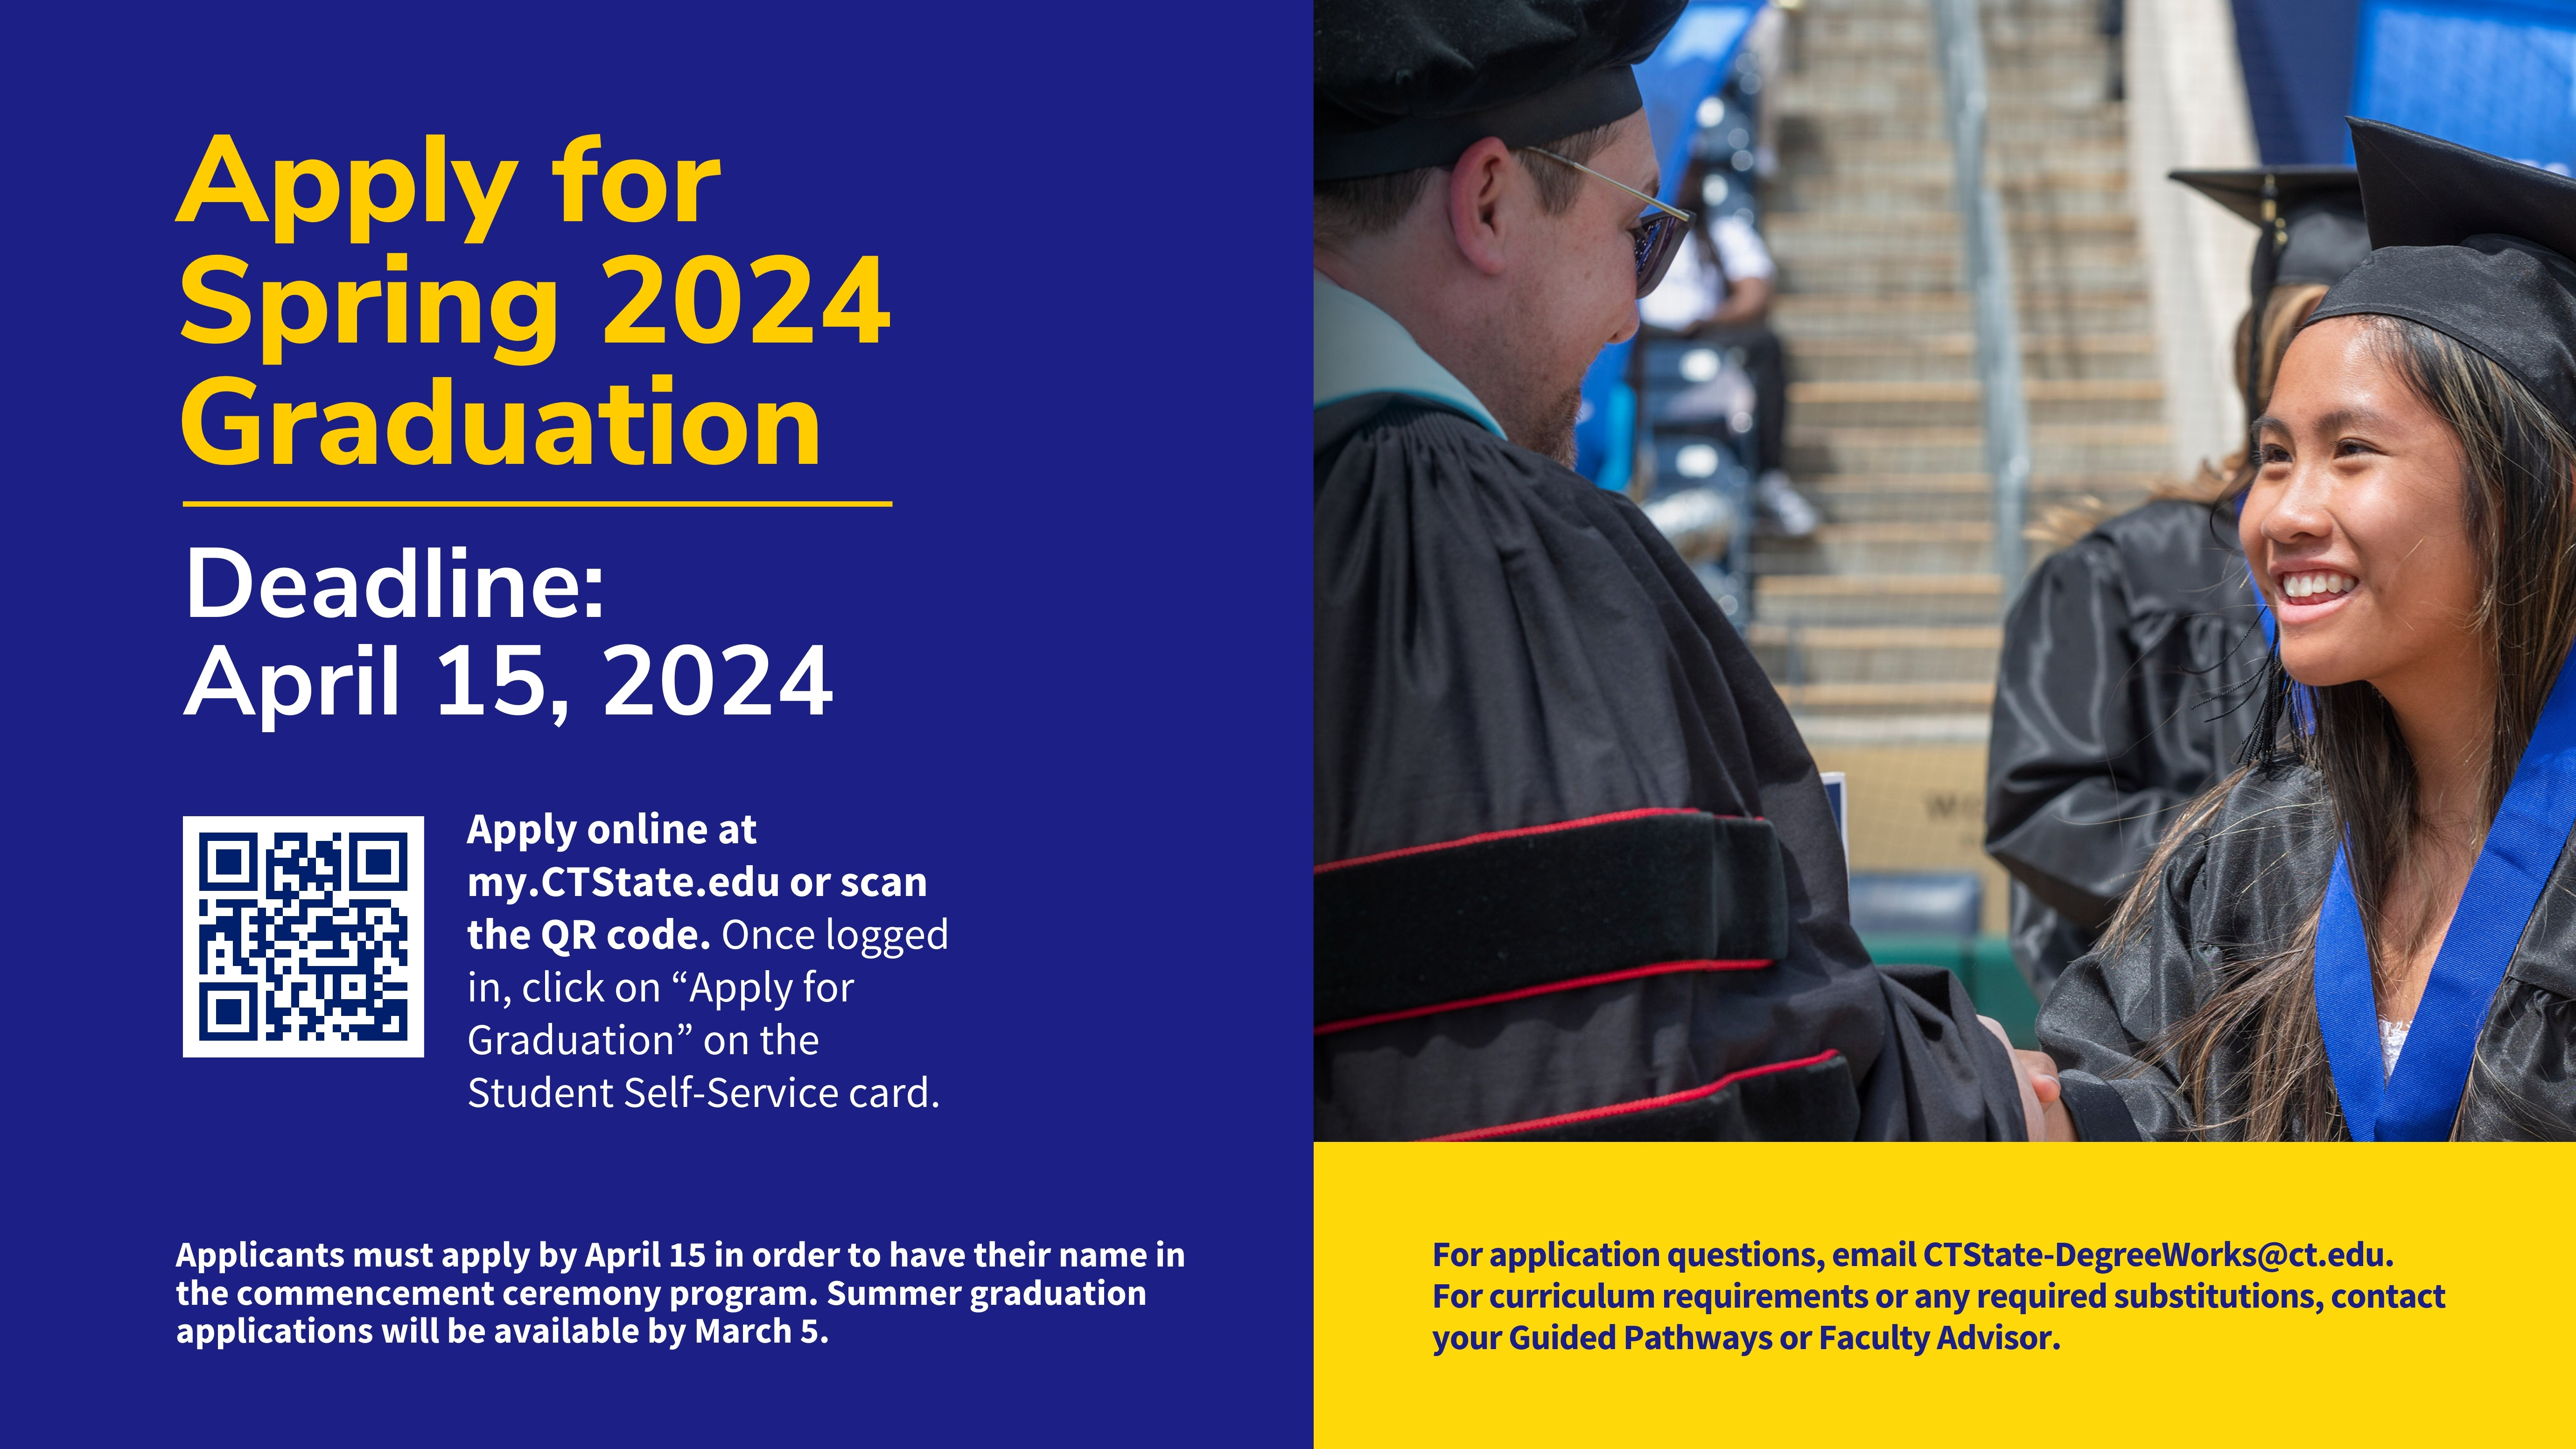 Apply For Spring 2024 Graduation. Deadline: April 15, 2024. Go to my.ctstate.edu and click on Apply For Graduation on the Student Self-Service Card